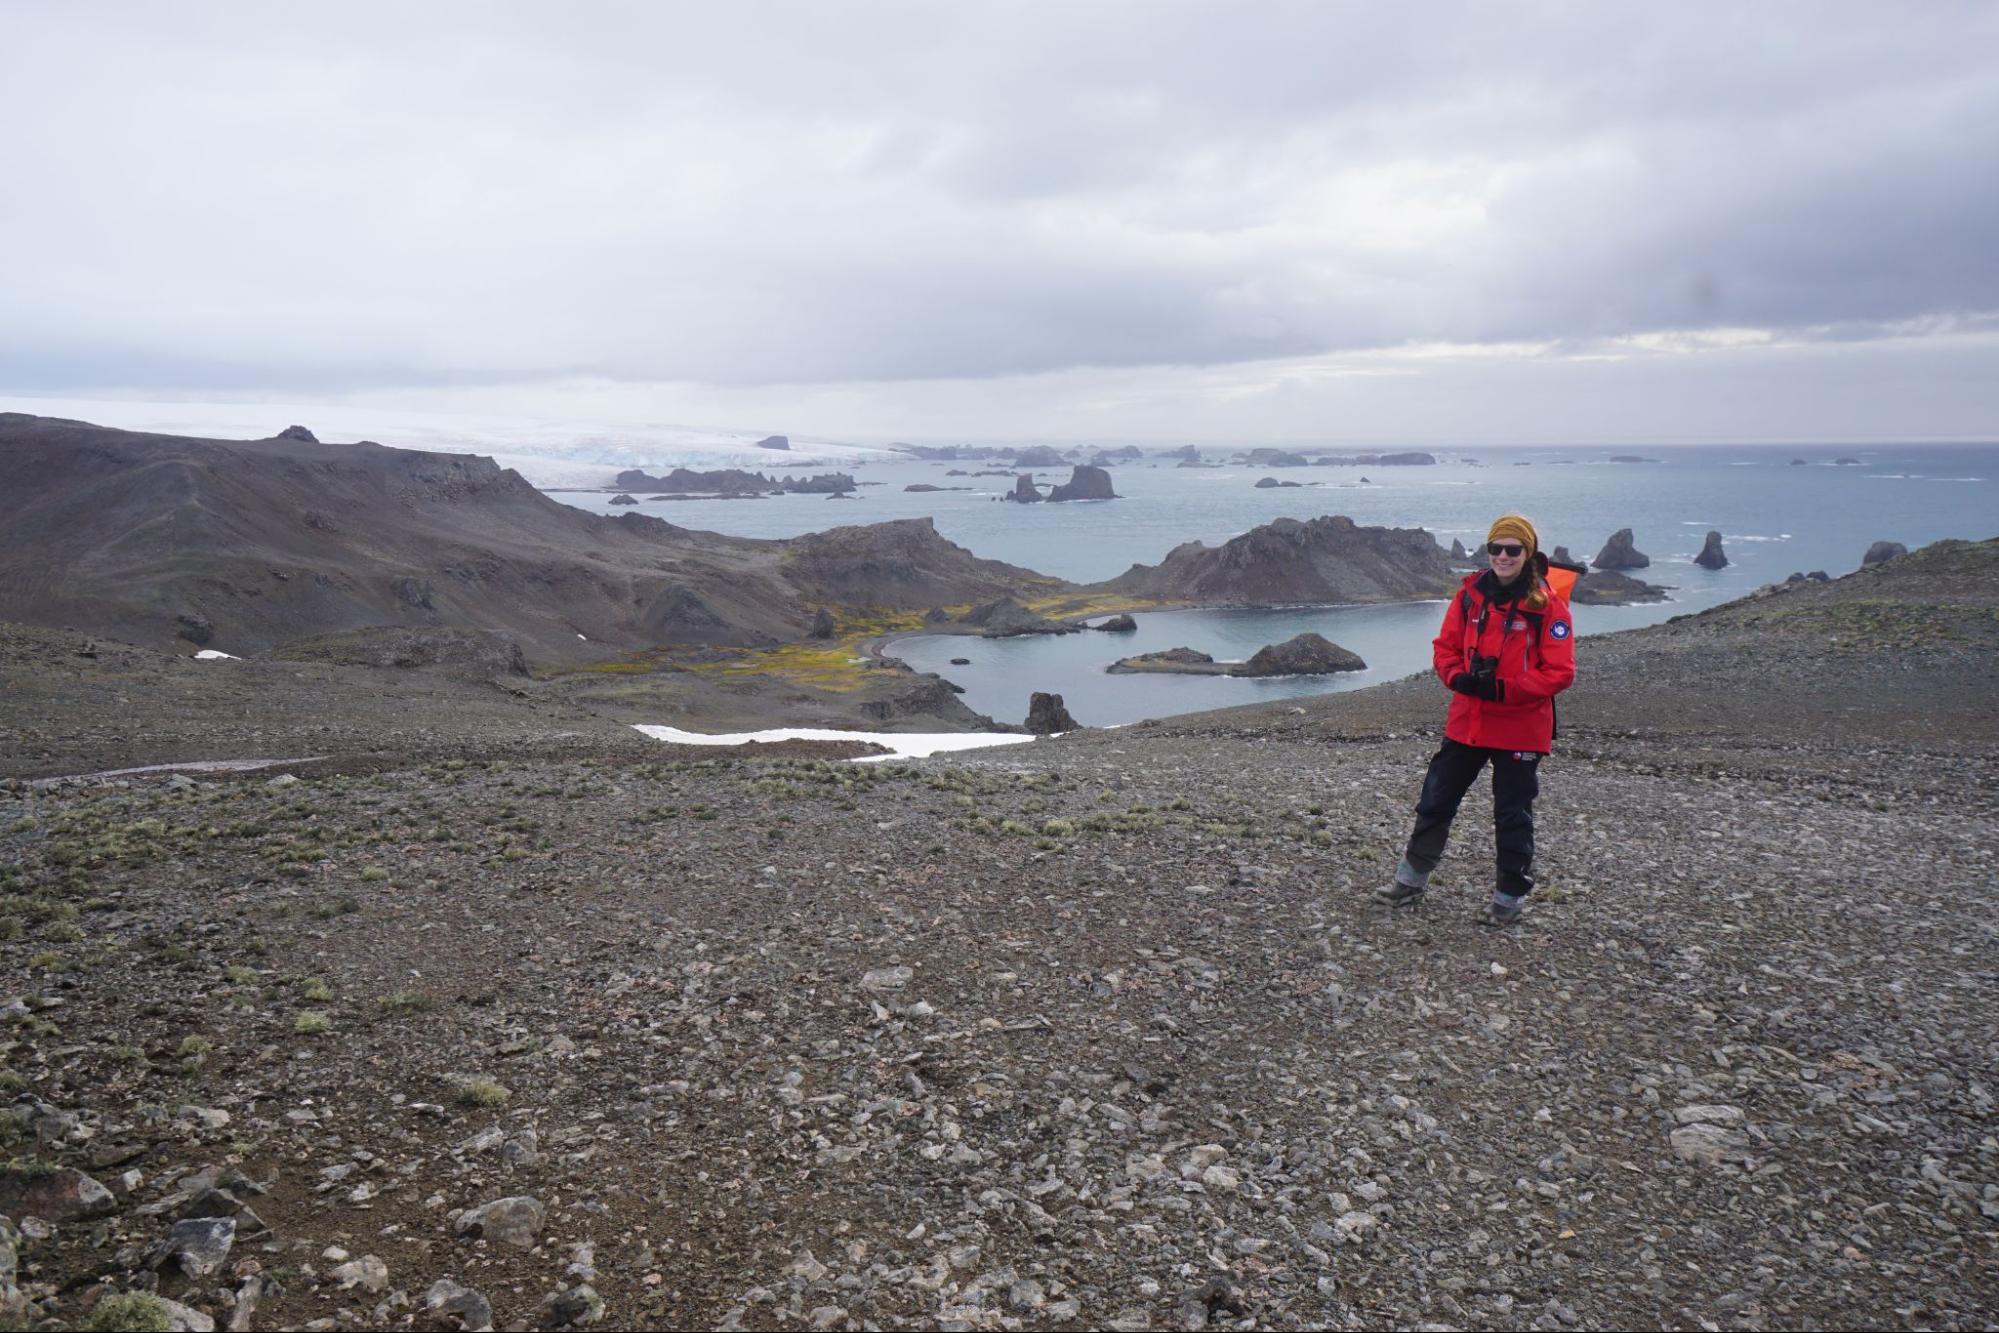 Far from the state Capitol, Theresa got the opportunity to conduct field work on the Antarctic Peninsula during graduate school. She thinks about this amazing place as she works on climate change legislation!